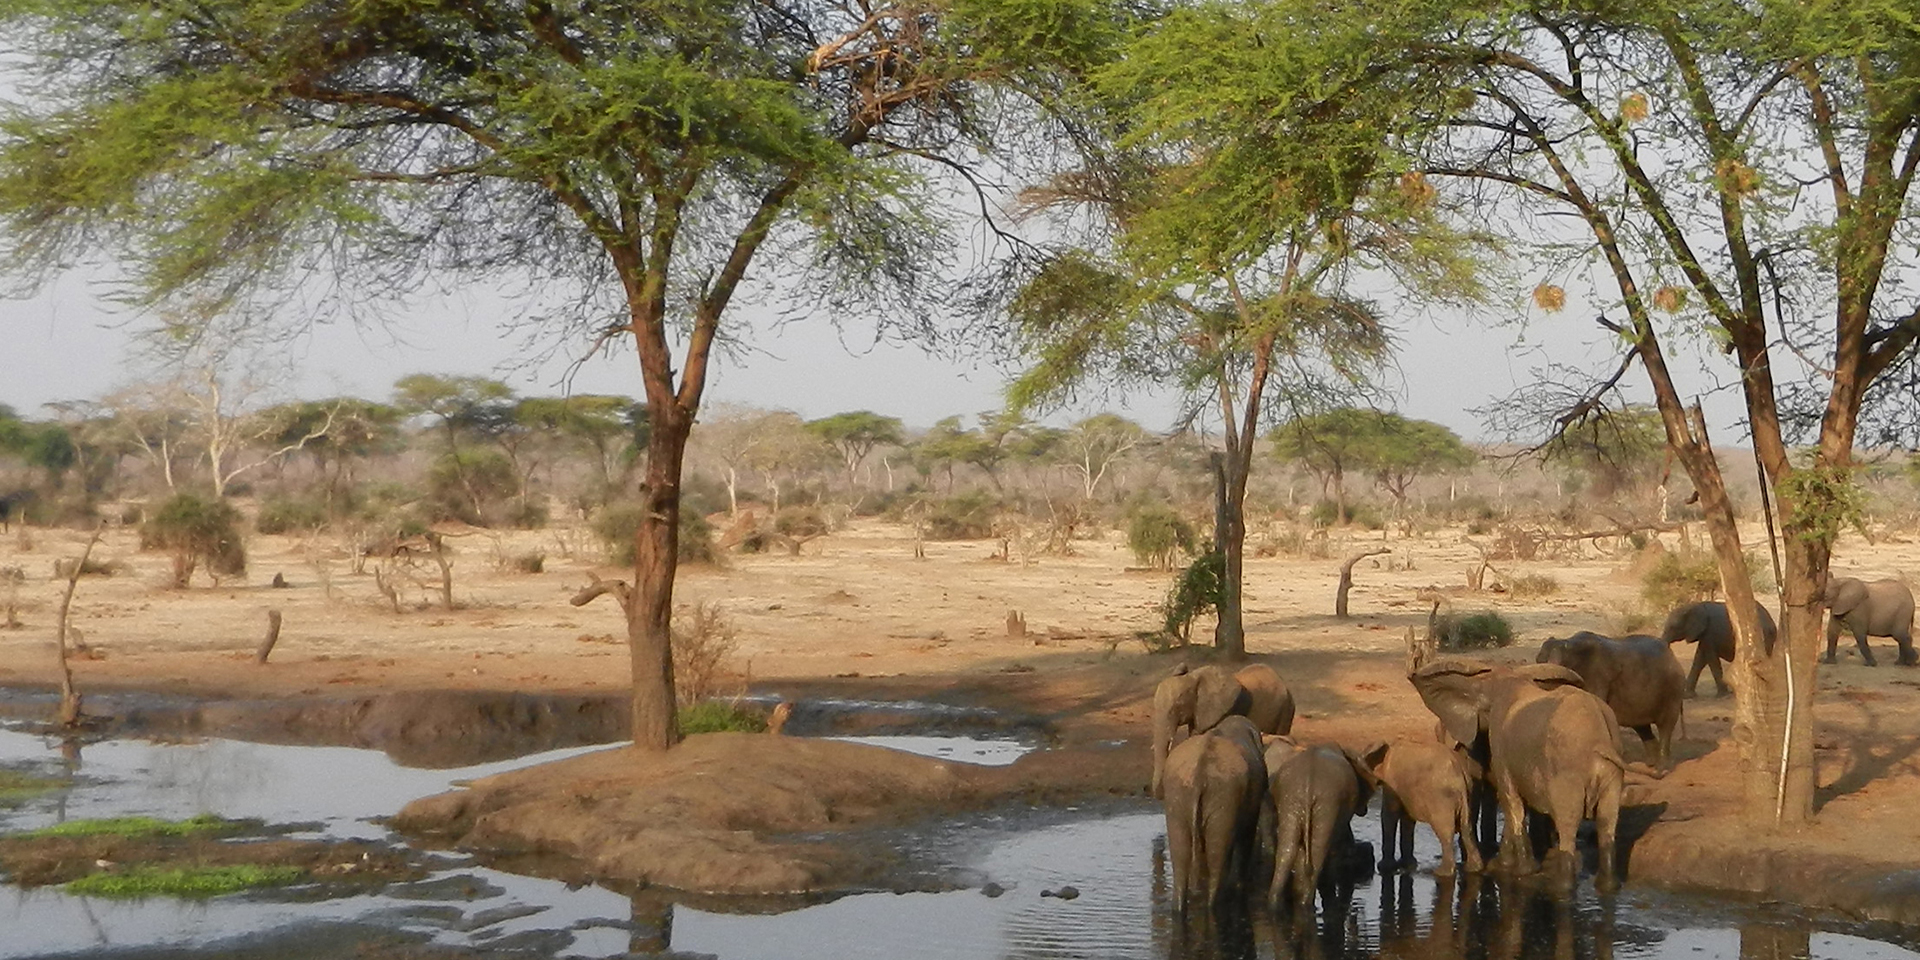 Image of a shallow river in a savanna with a herd of elephants drinking on its edge.